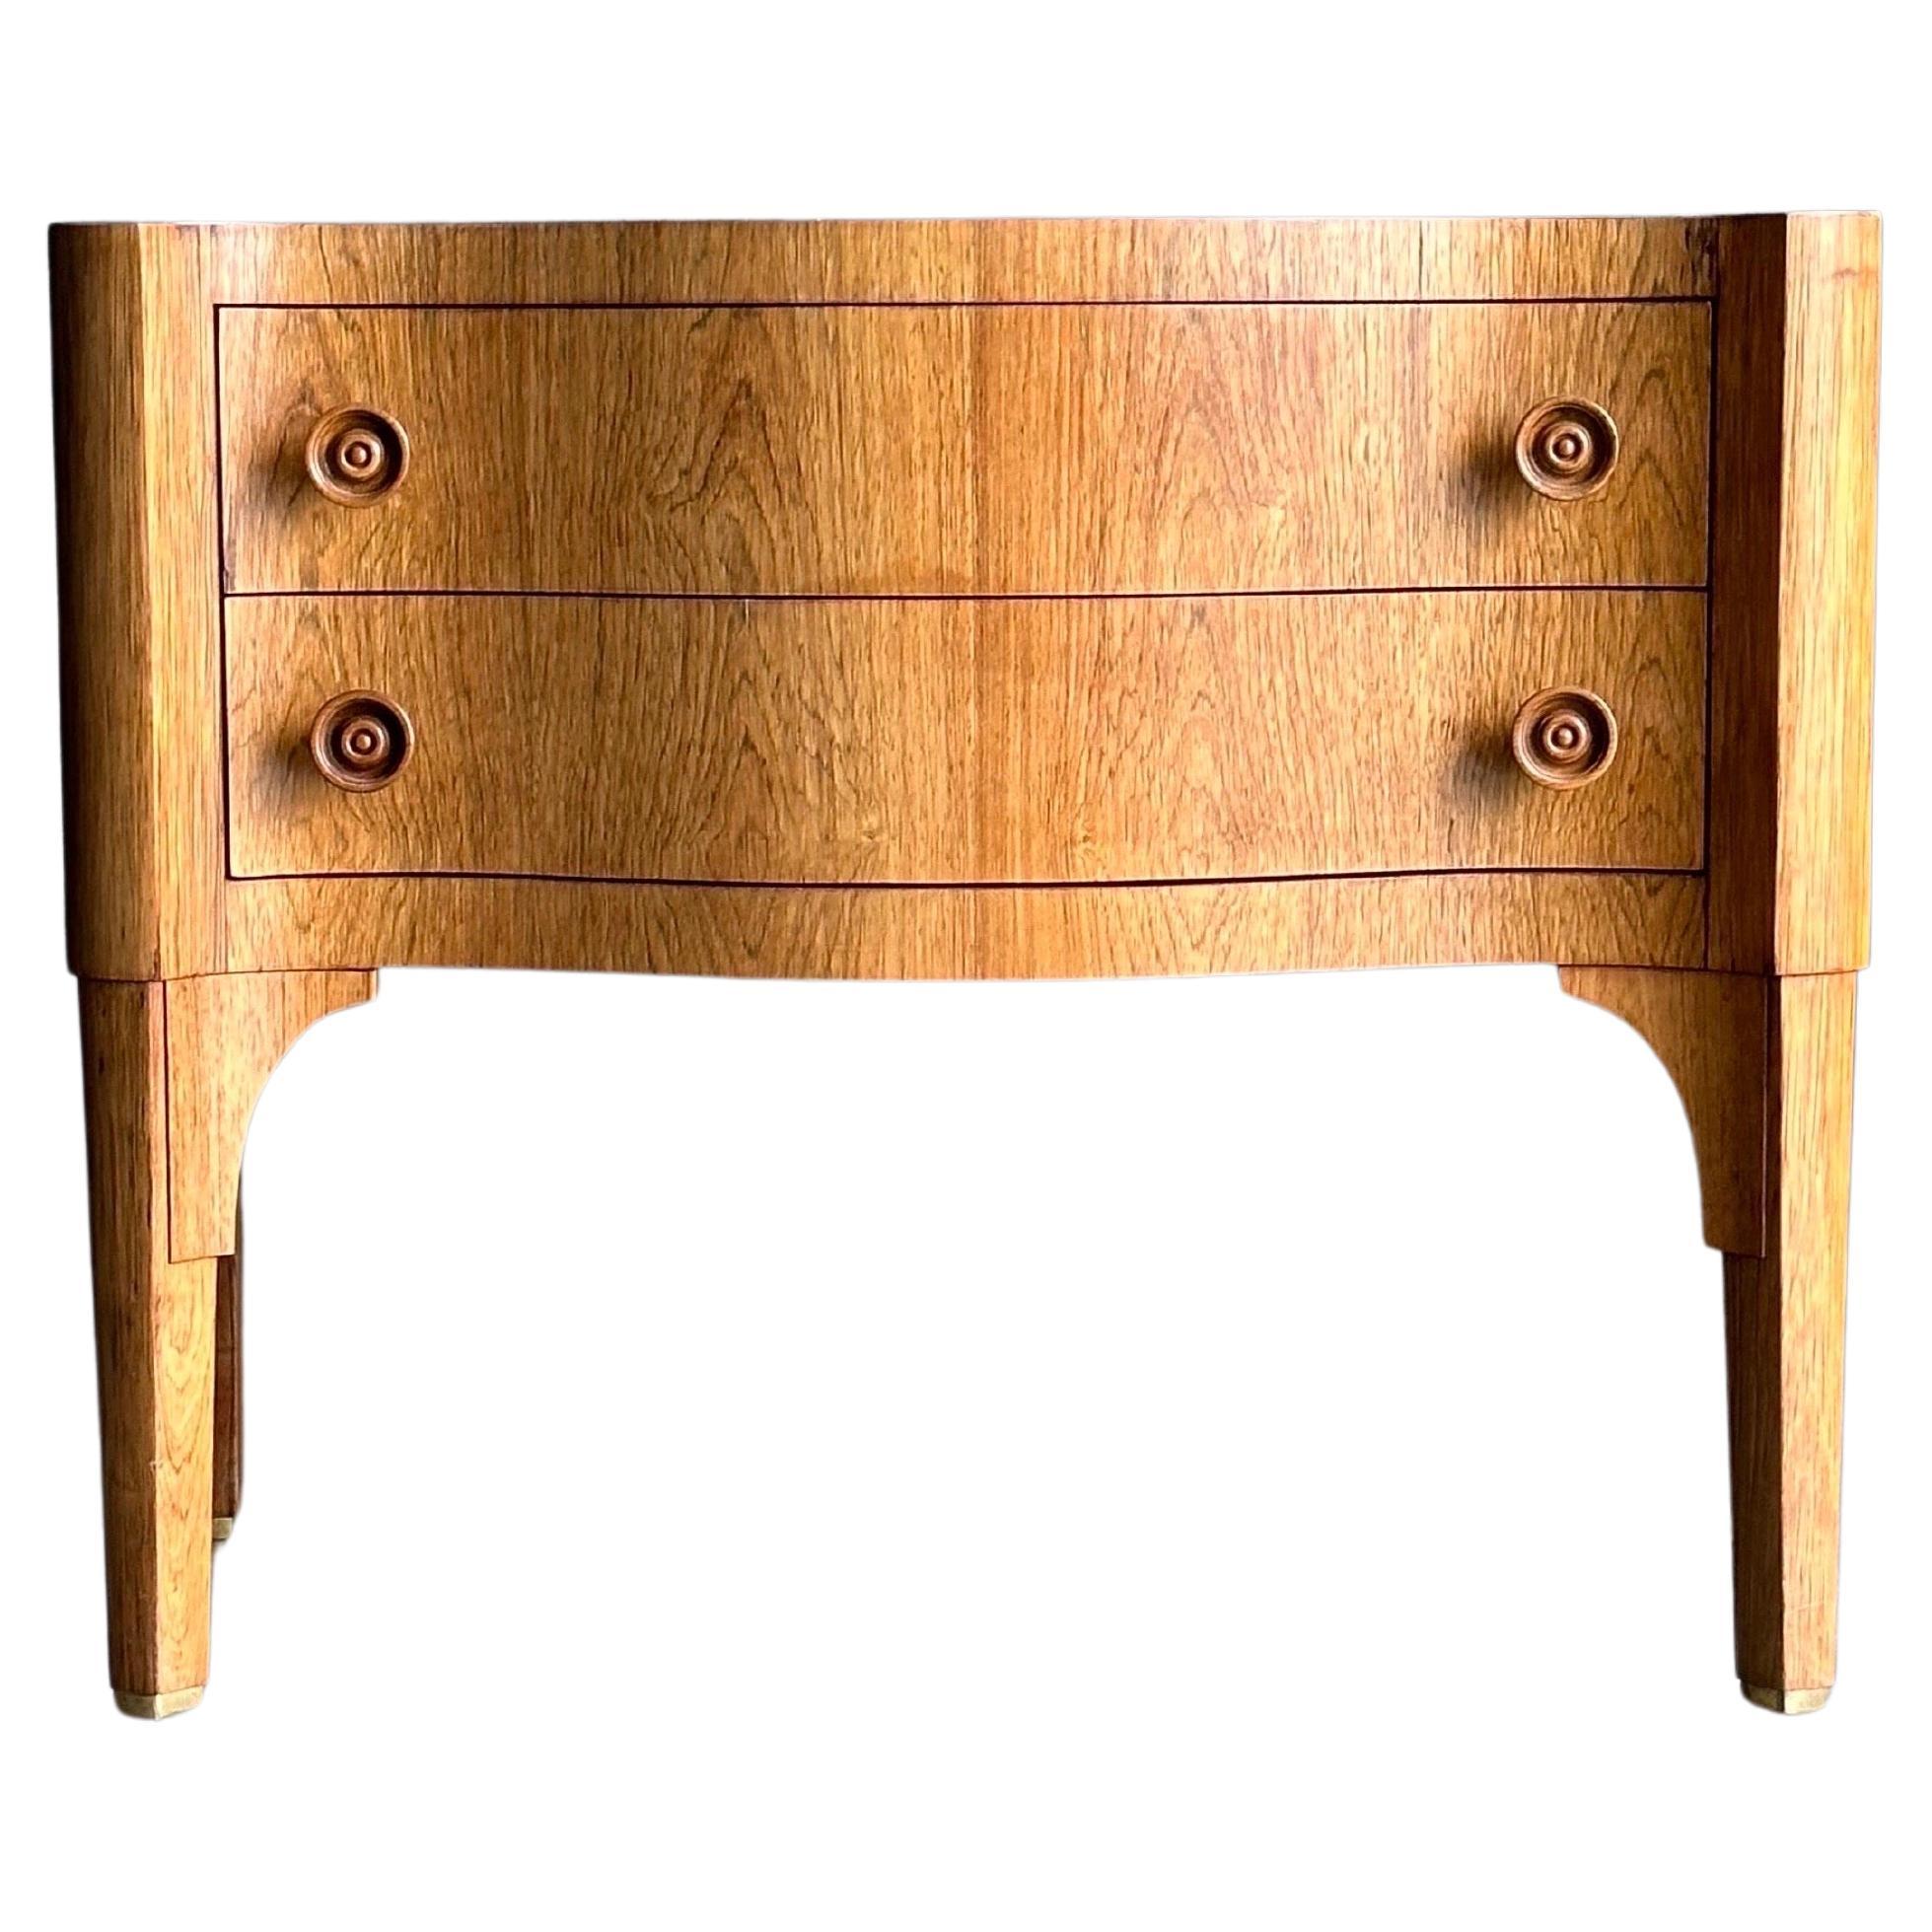 A rare small rosewood commode designed by Edward Wormley for Dunbar, model 6335A. Features a rosewood case with turned rosewood pulls. A very uncommon example, and especially so with this specific order being done in a custom height of 26”. Latch on